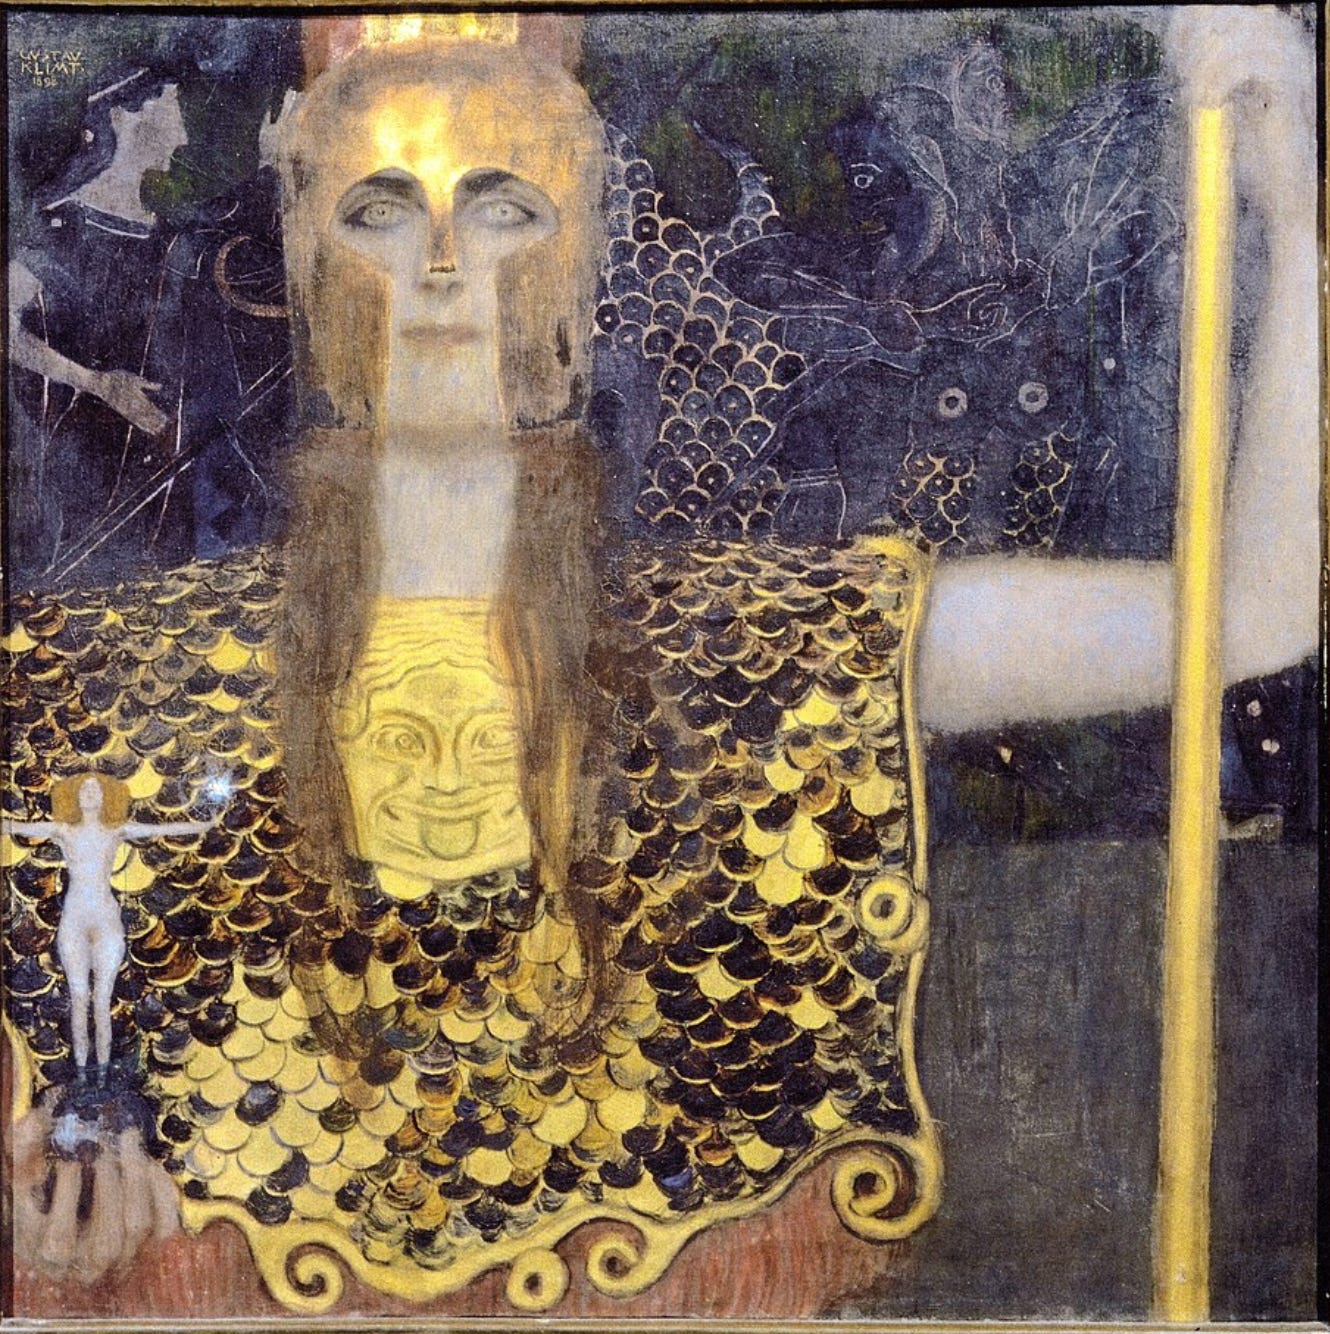 Against a background of blues and blacks etched with mystical figures, a woman with light gold-green eyes, wearing a gold helmet and gold-scaled chest armor, stands in a pose of defiance. On the breastbone of the armor is a comic face, eyes crossed, tongue extended. The woman’s left arm is extended, grasping a golden staff; balancing on her right fingertips is a statue of a female figure with arms extended to the heavens, head back as if in praise.